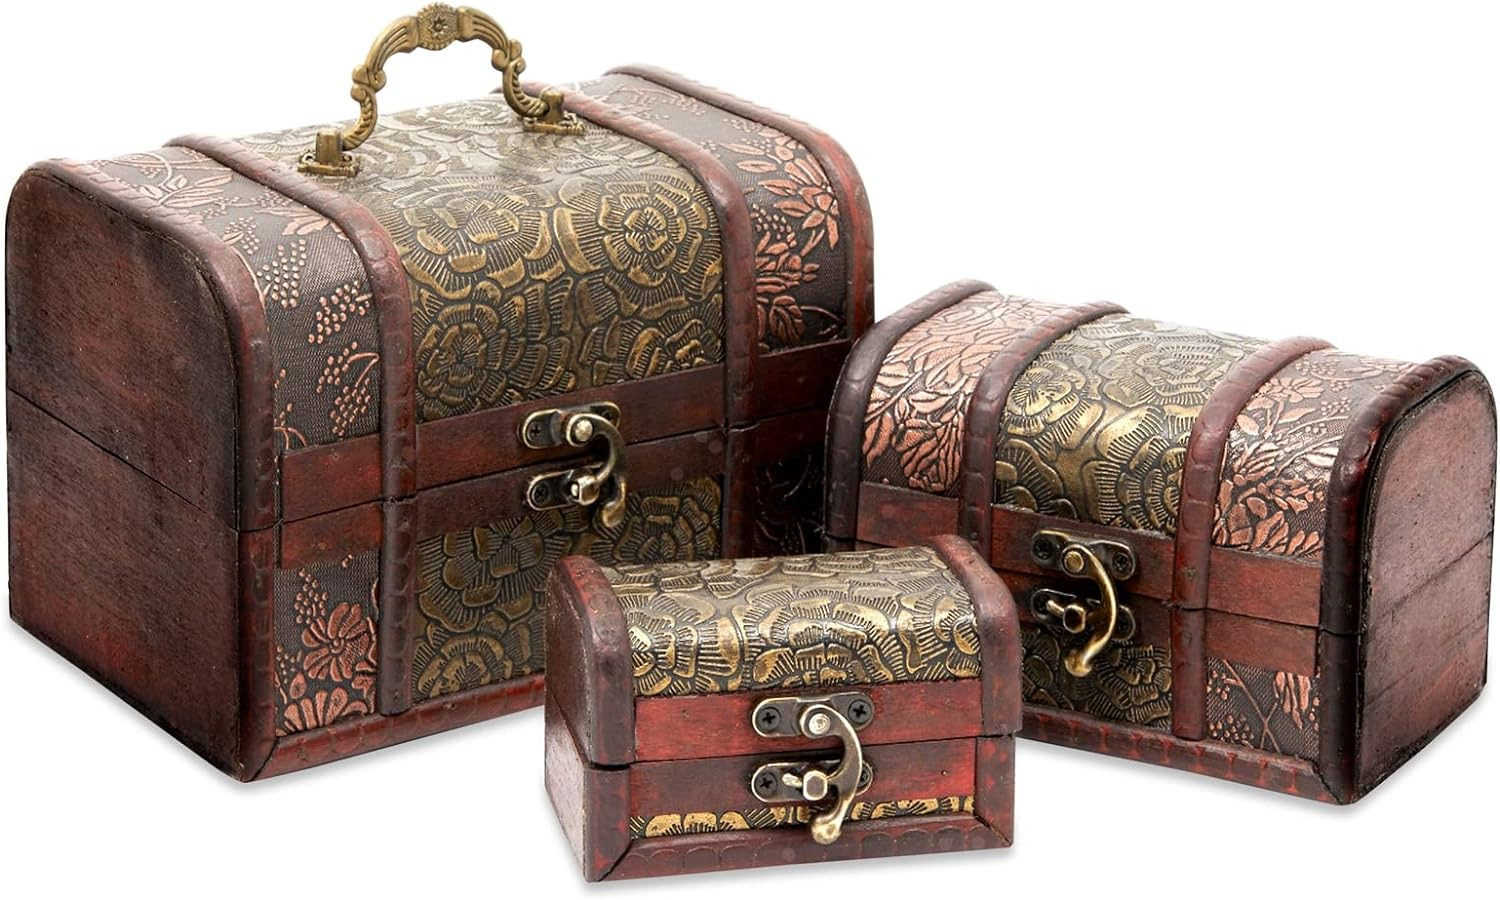 3-Set Small Wooden Treasure Chest Boxes with Flower Motifs Decorative Vintage St